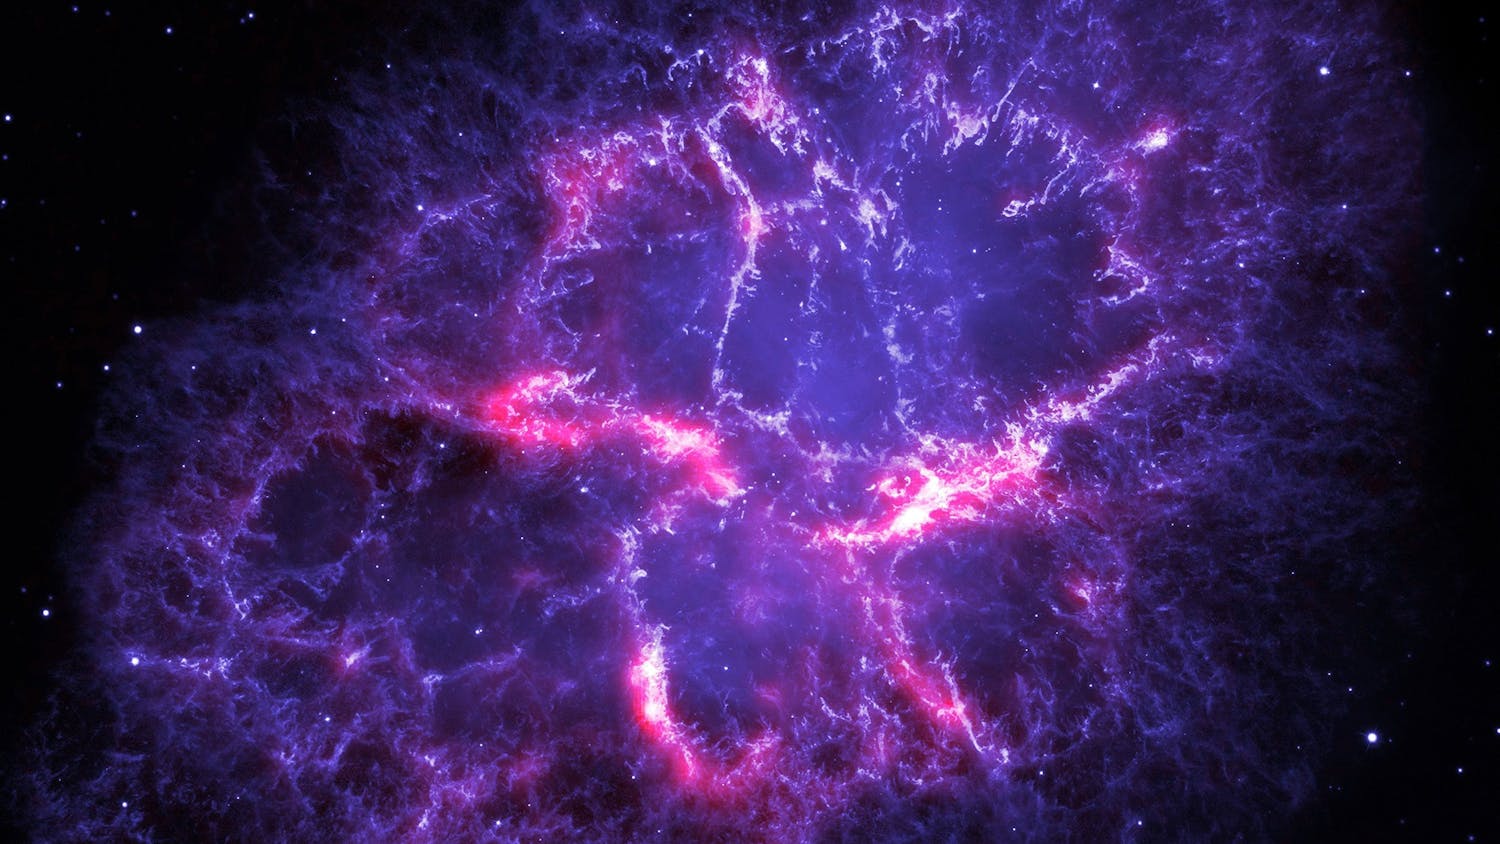 This image from the Hubble Space Telescope, released in Sept. 2009, is one among the largest the telescope has ever produced. It gives the most detailed view so far of the entire Crab Nebula.